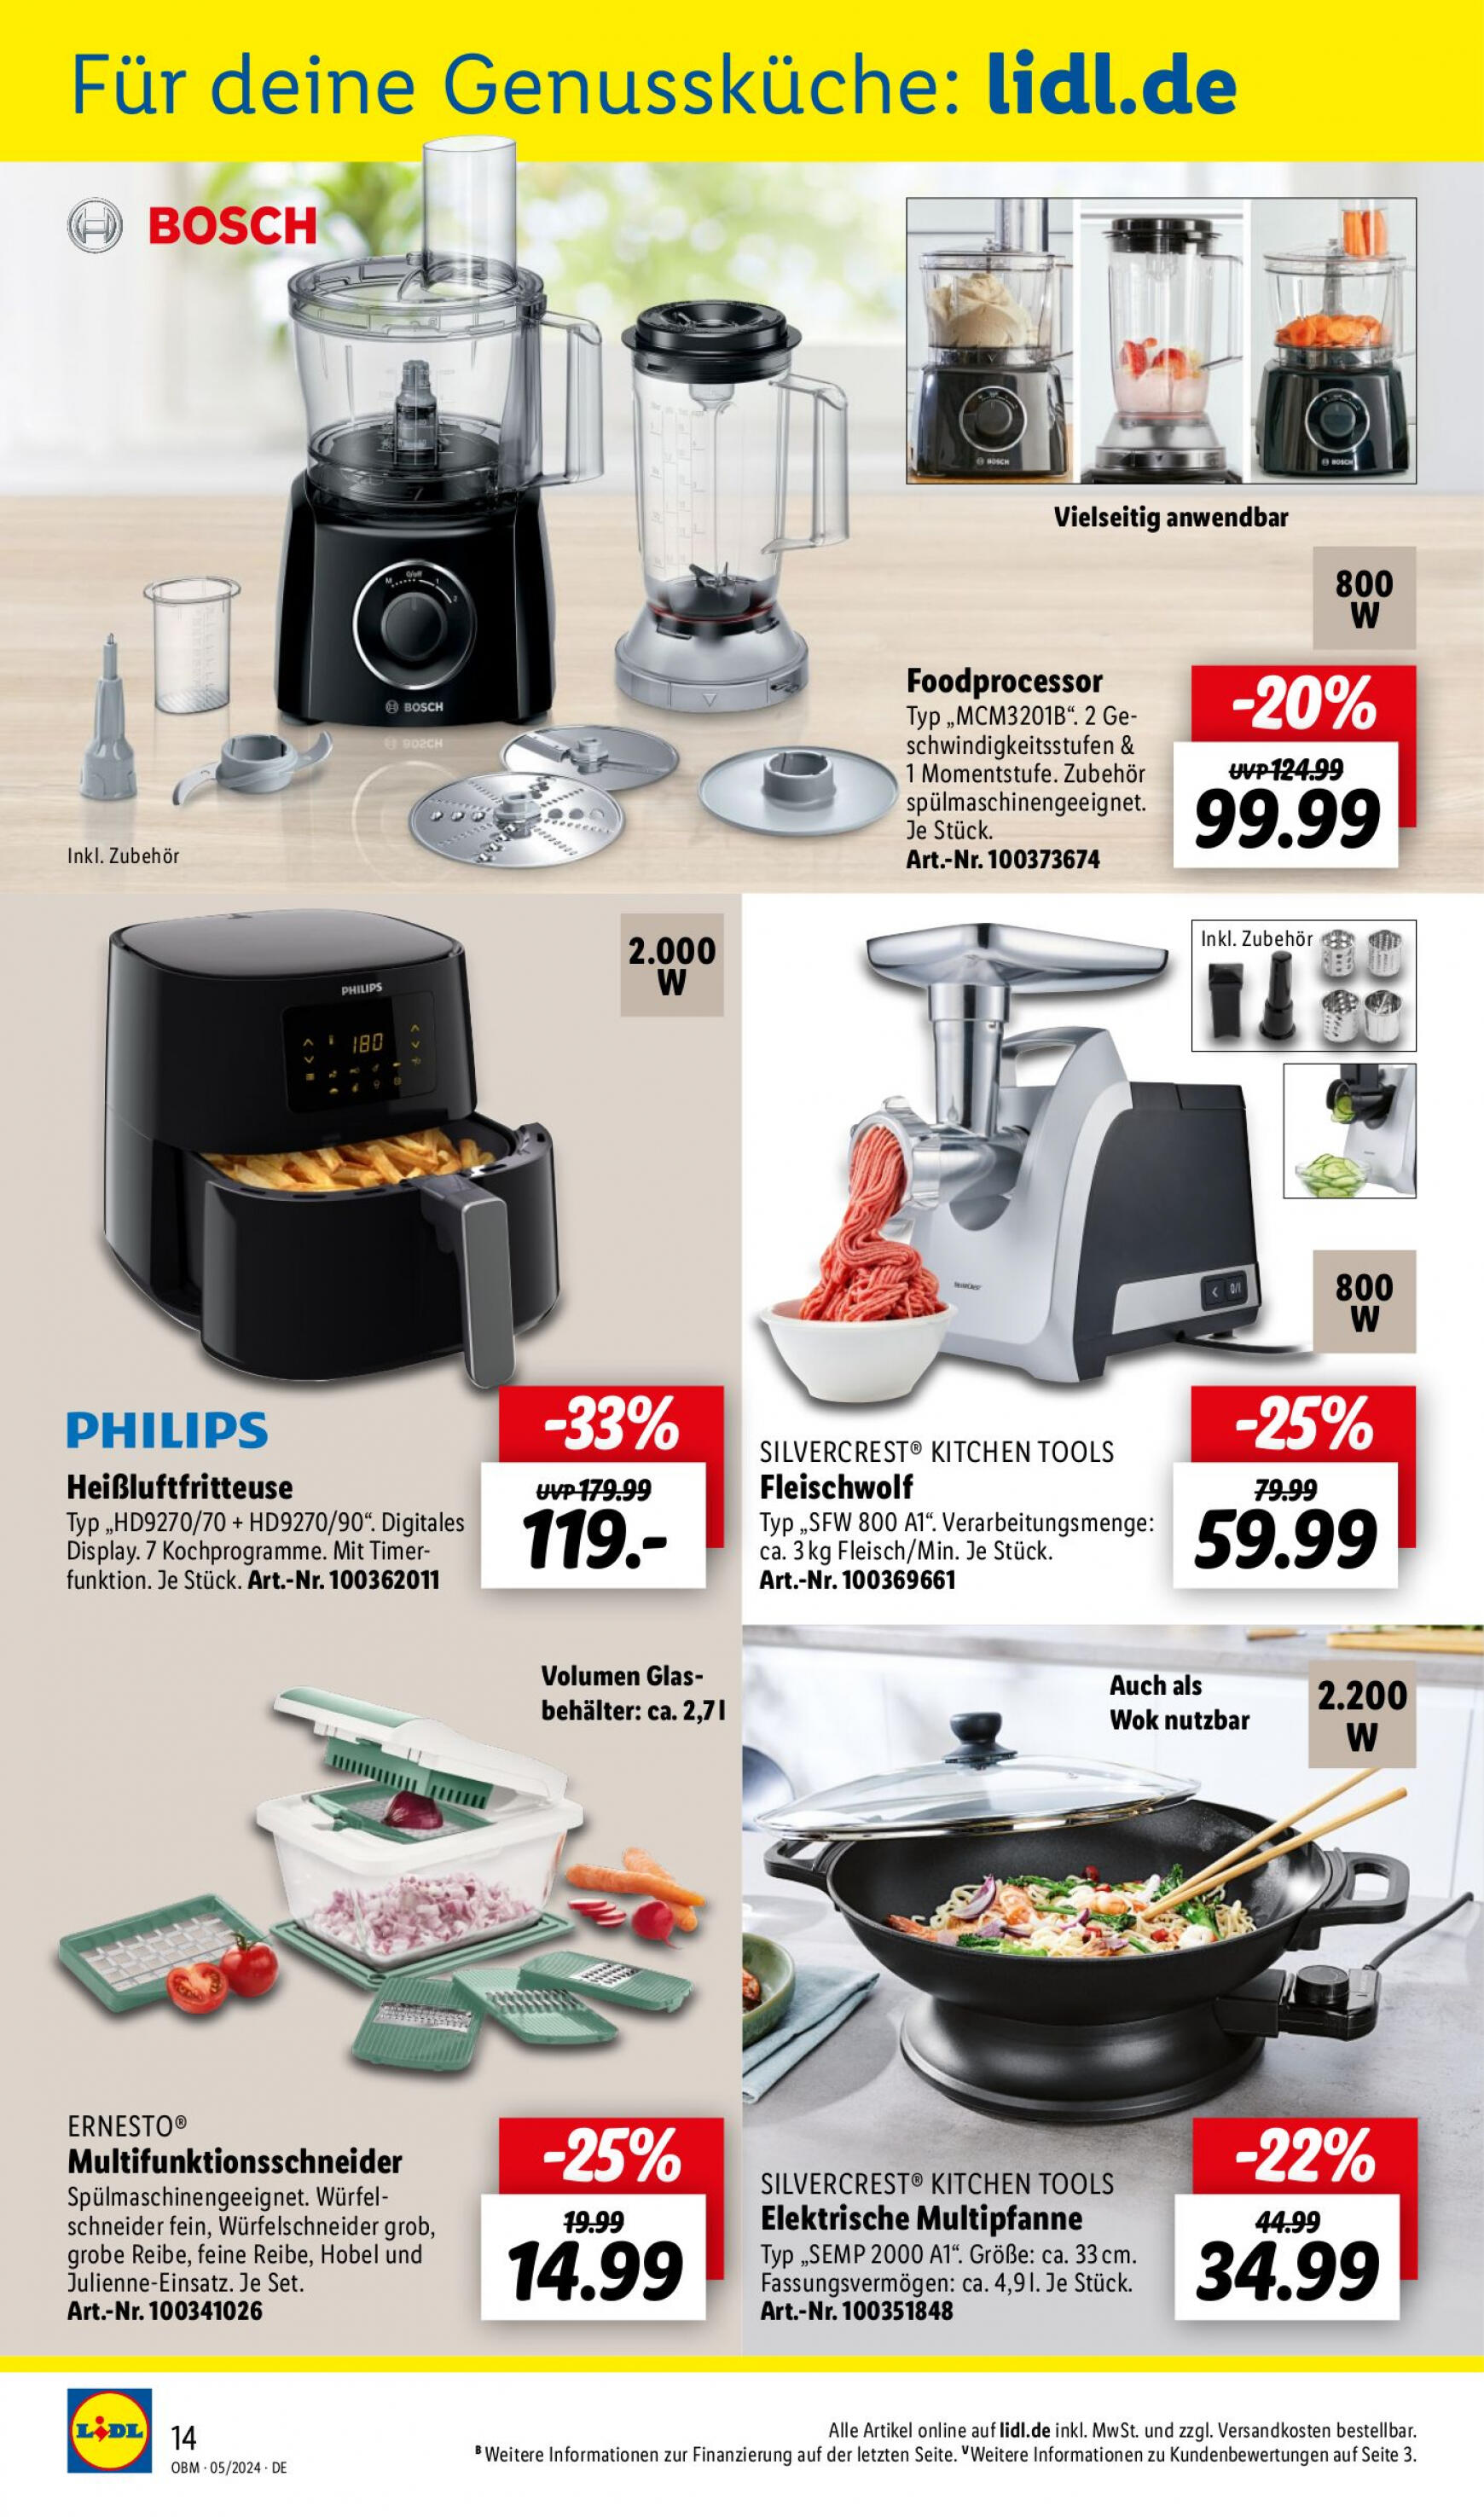 lidl - Flyer Lidl - Aktuelle Onlineshop-Highlights aktuell 01.05. - 31.05. - page: 14